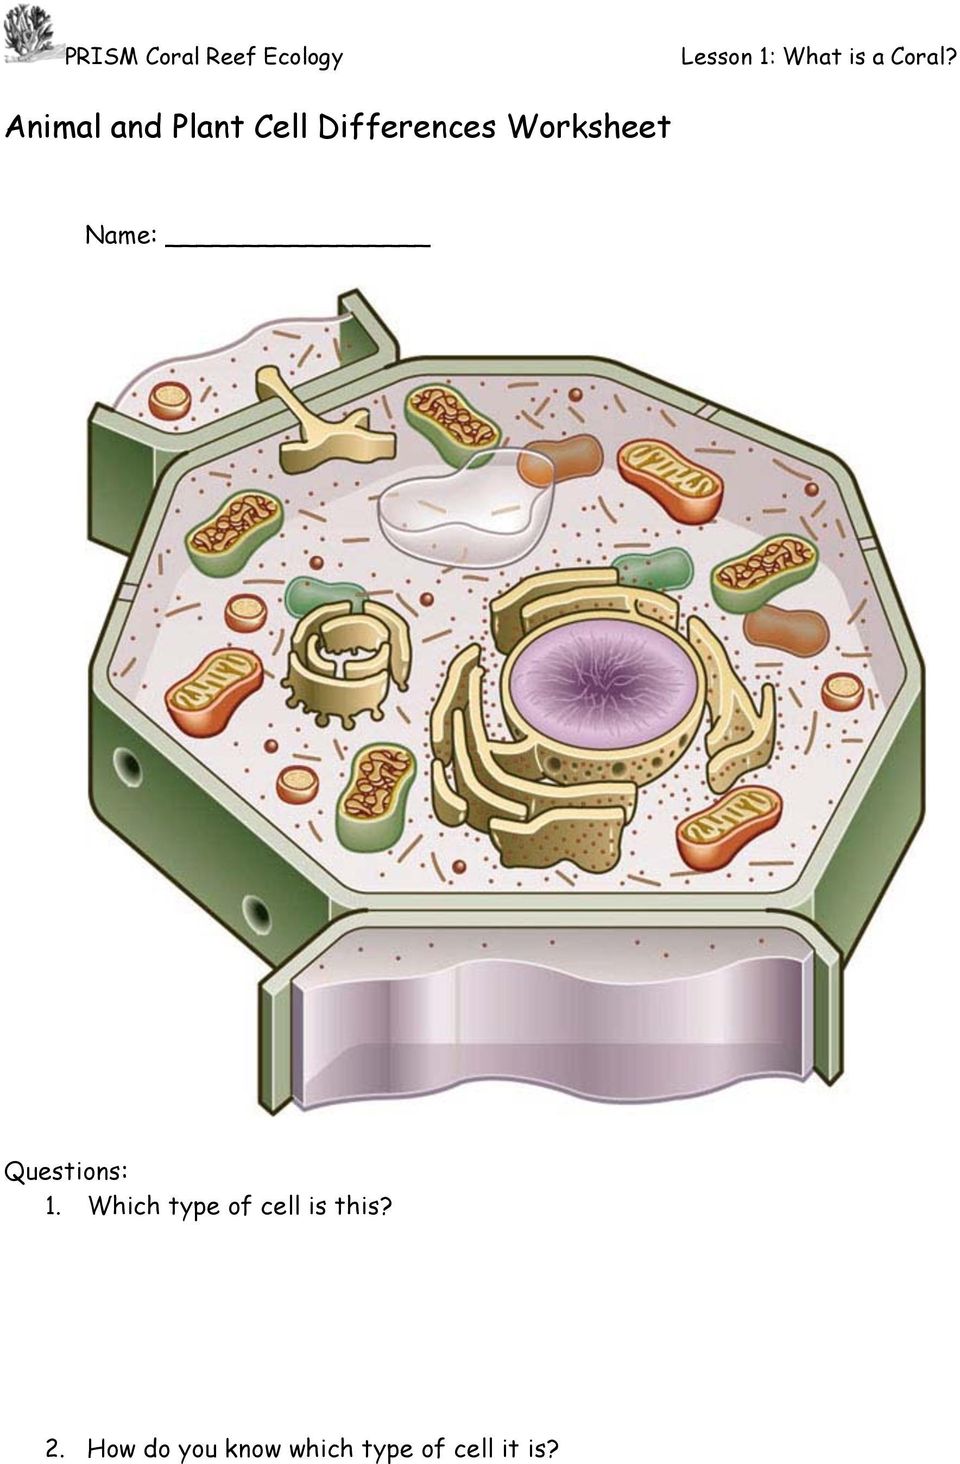 Which type of cell is this? 2.